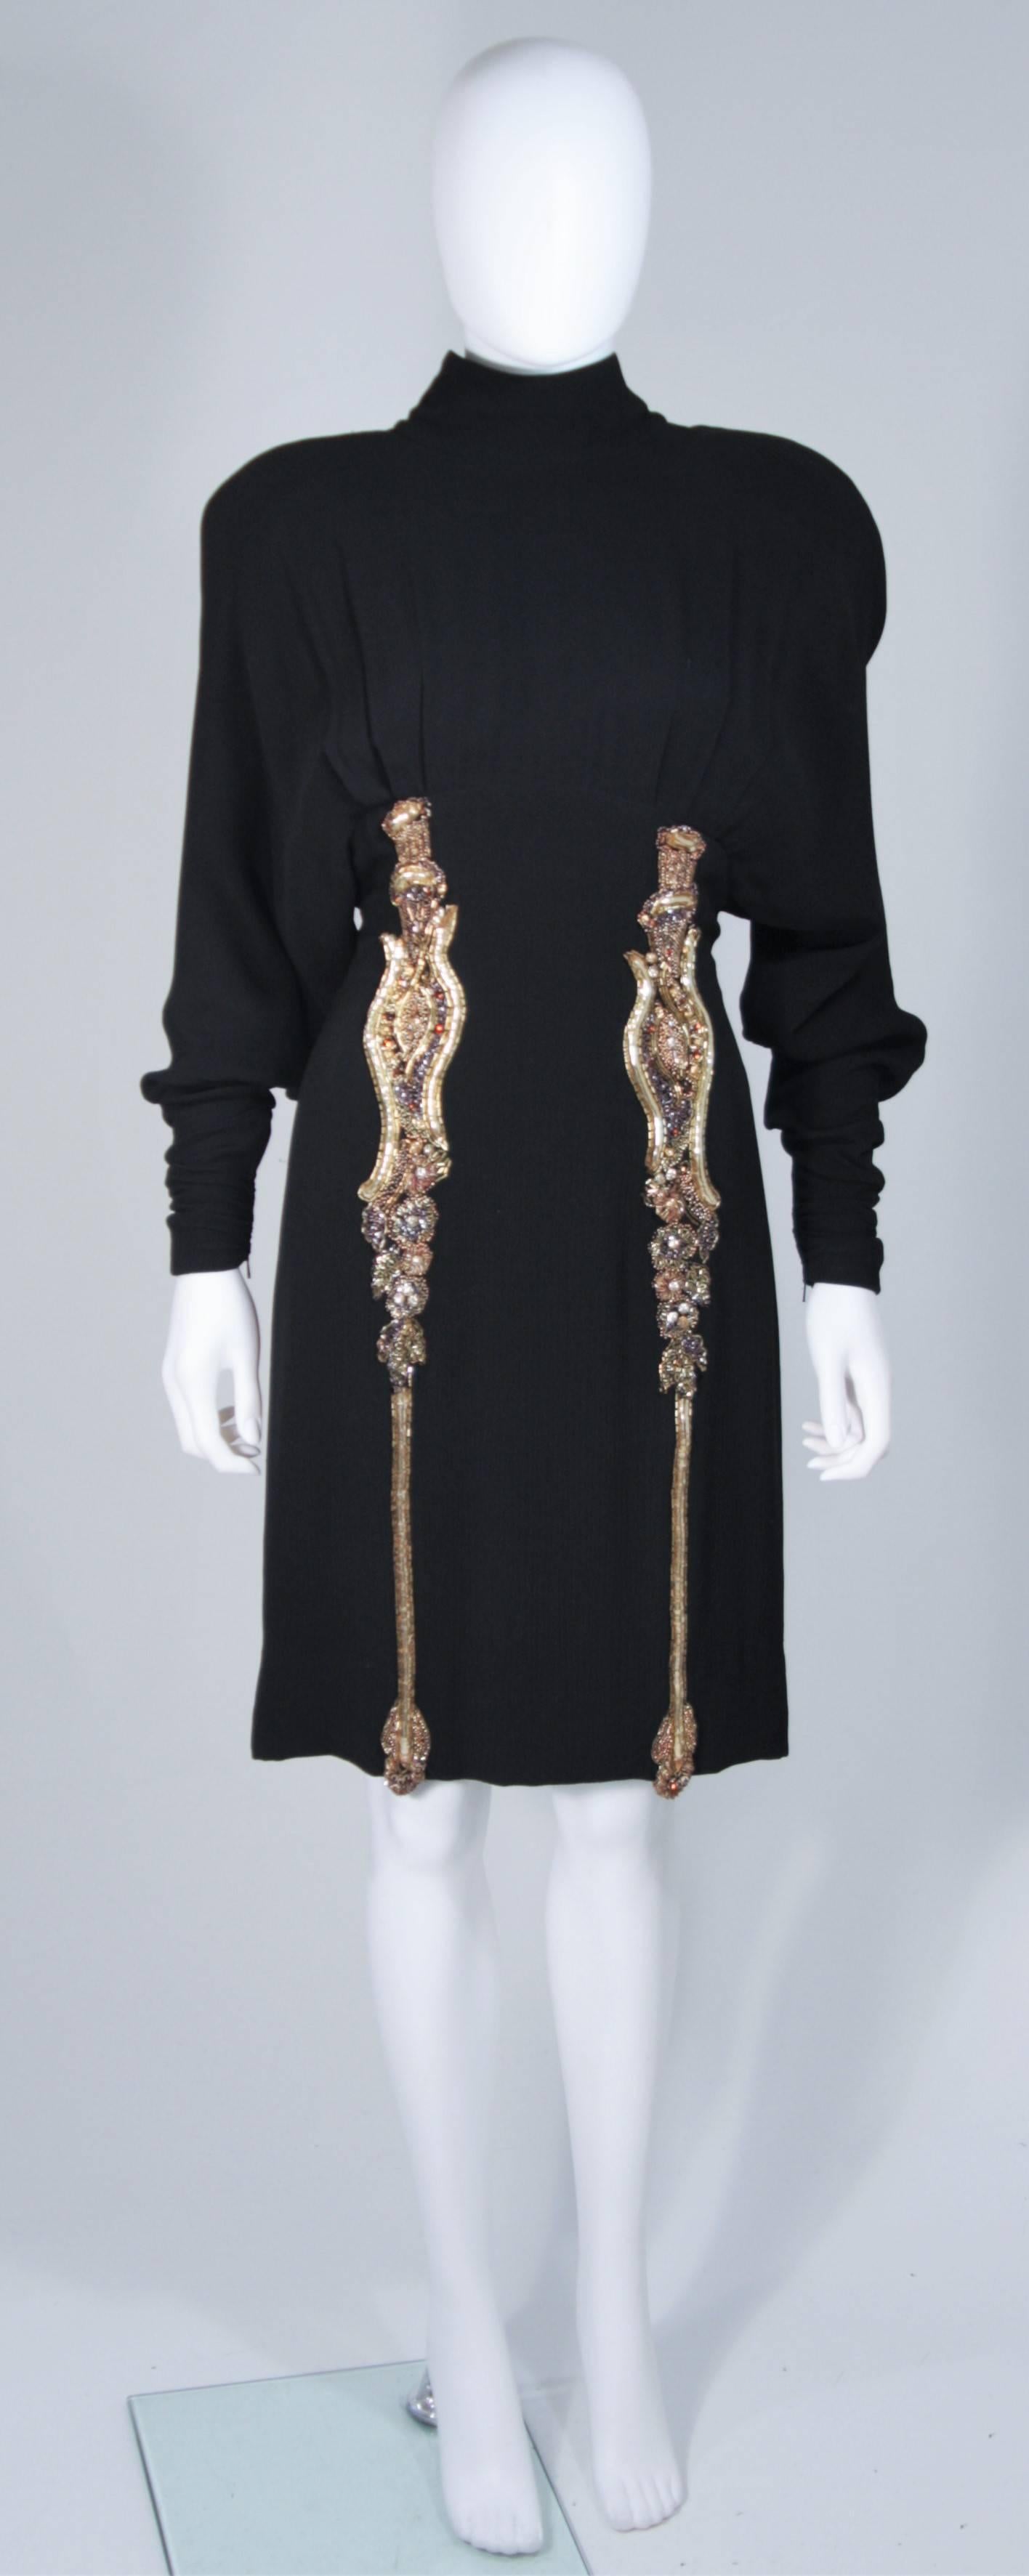 This Karl Lagerfeld cocktail dress is composed of an embellished black silk. Features two large beaded appliques on the front, dolman style sleeves, a center back zipper, and rouched sleeve ends with zippers. In excellent vintage condition.